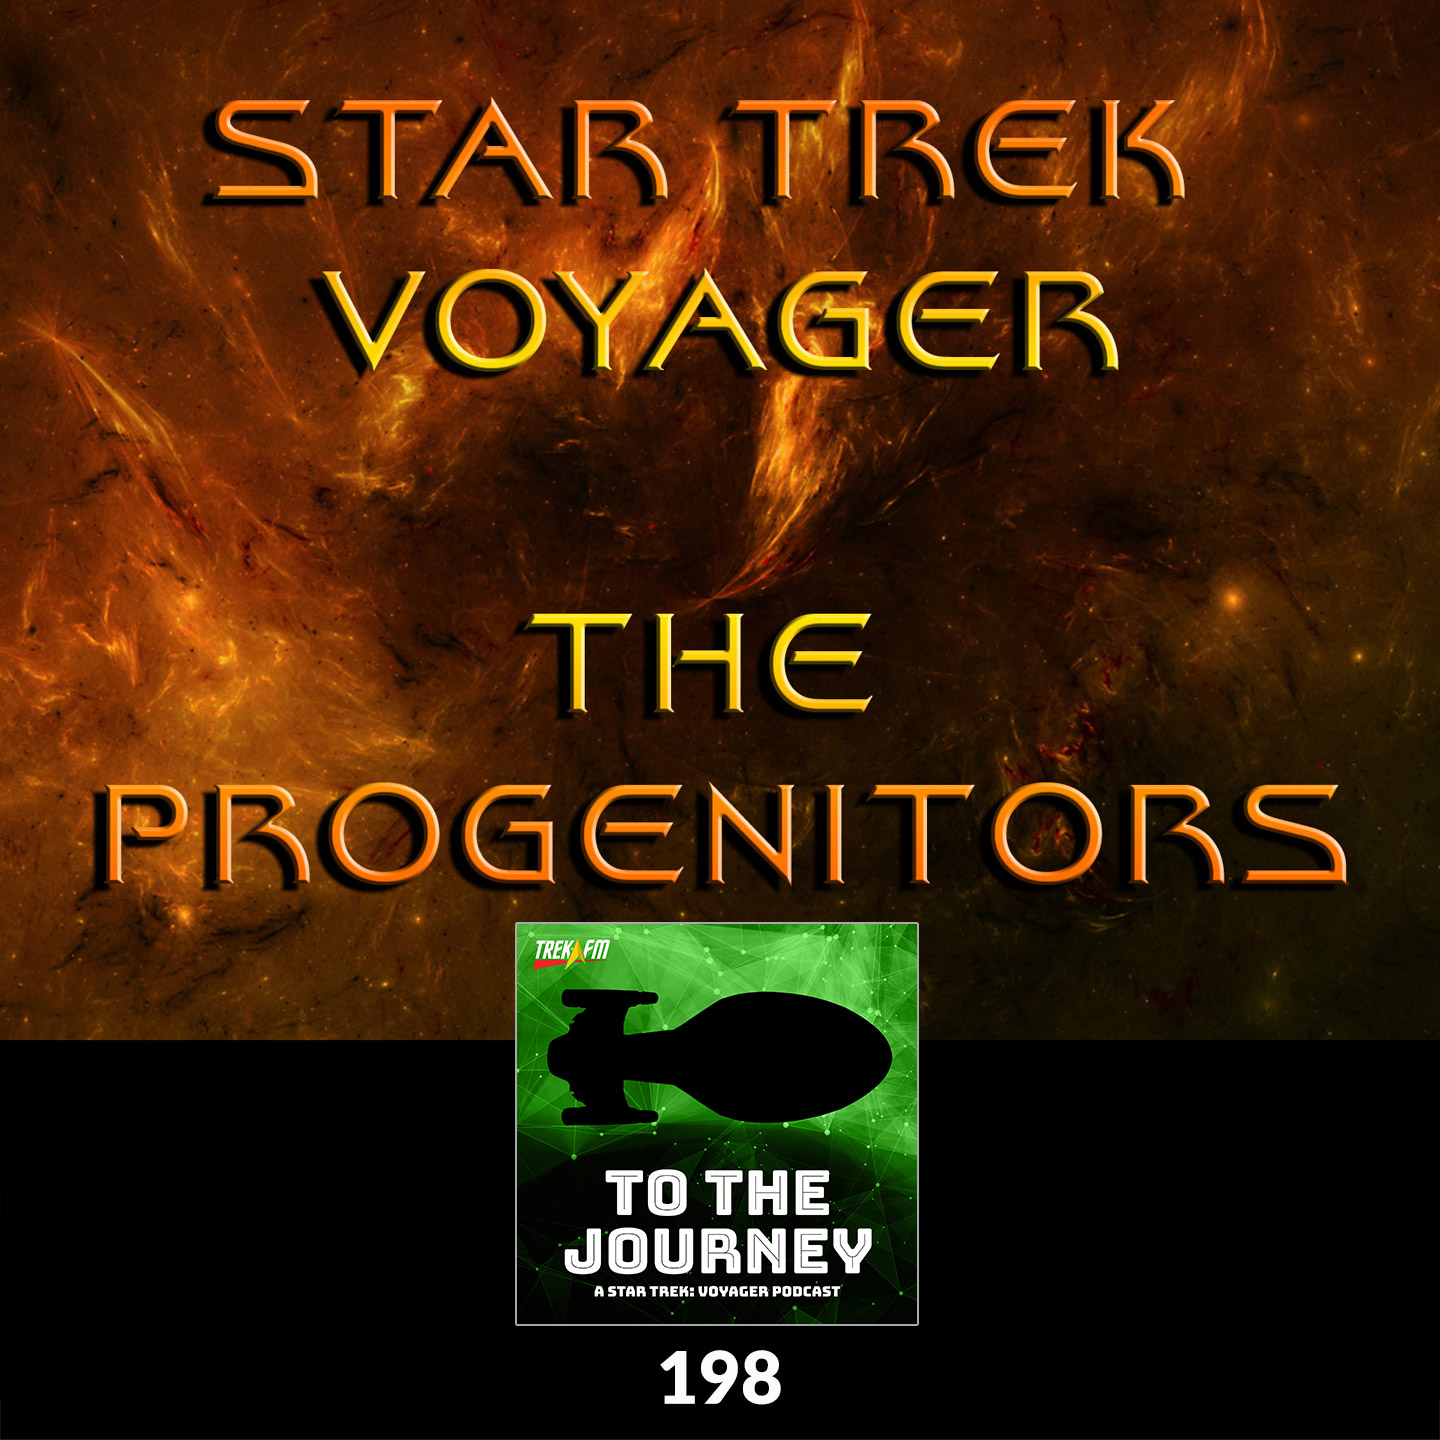 To The Journey 198: The Progenitors - The Voyager Movie